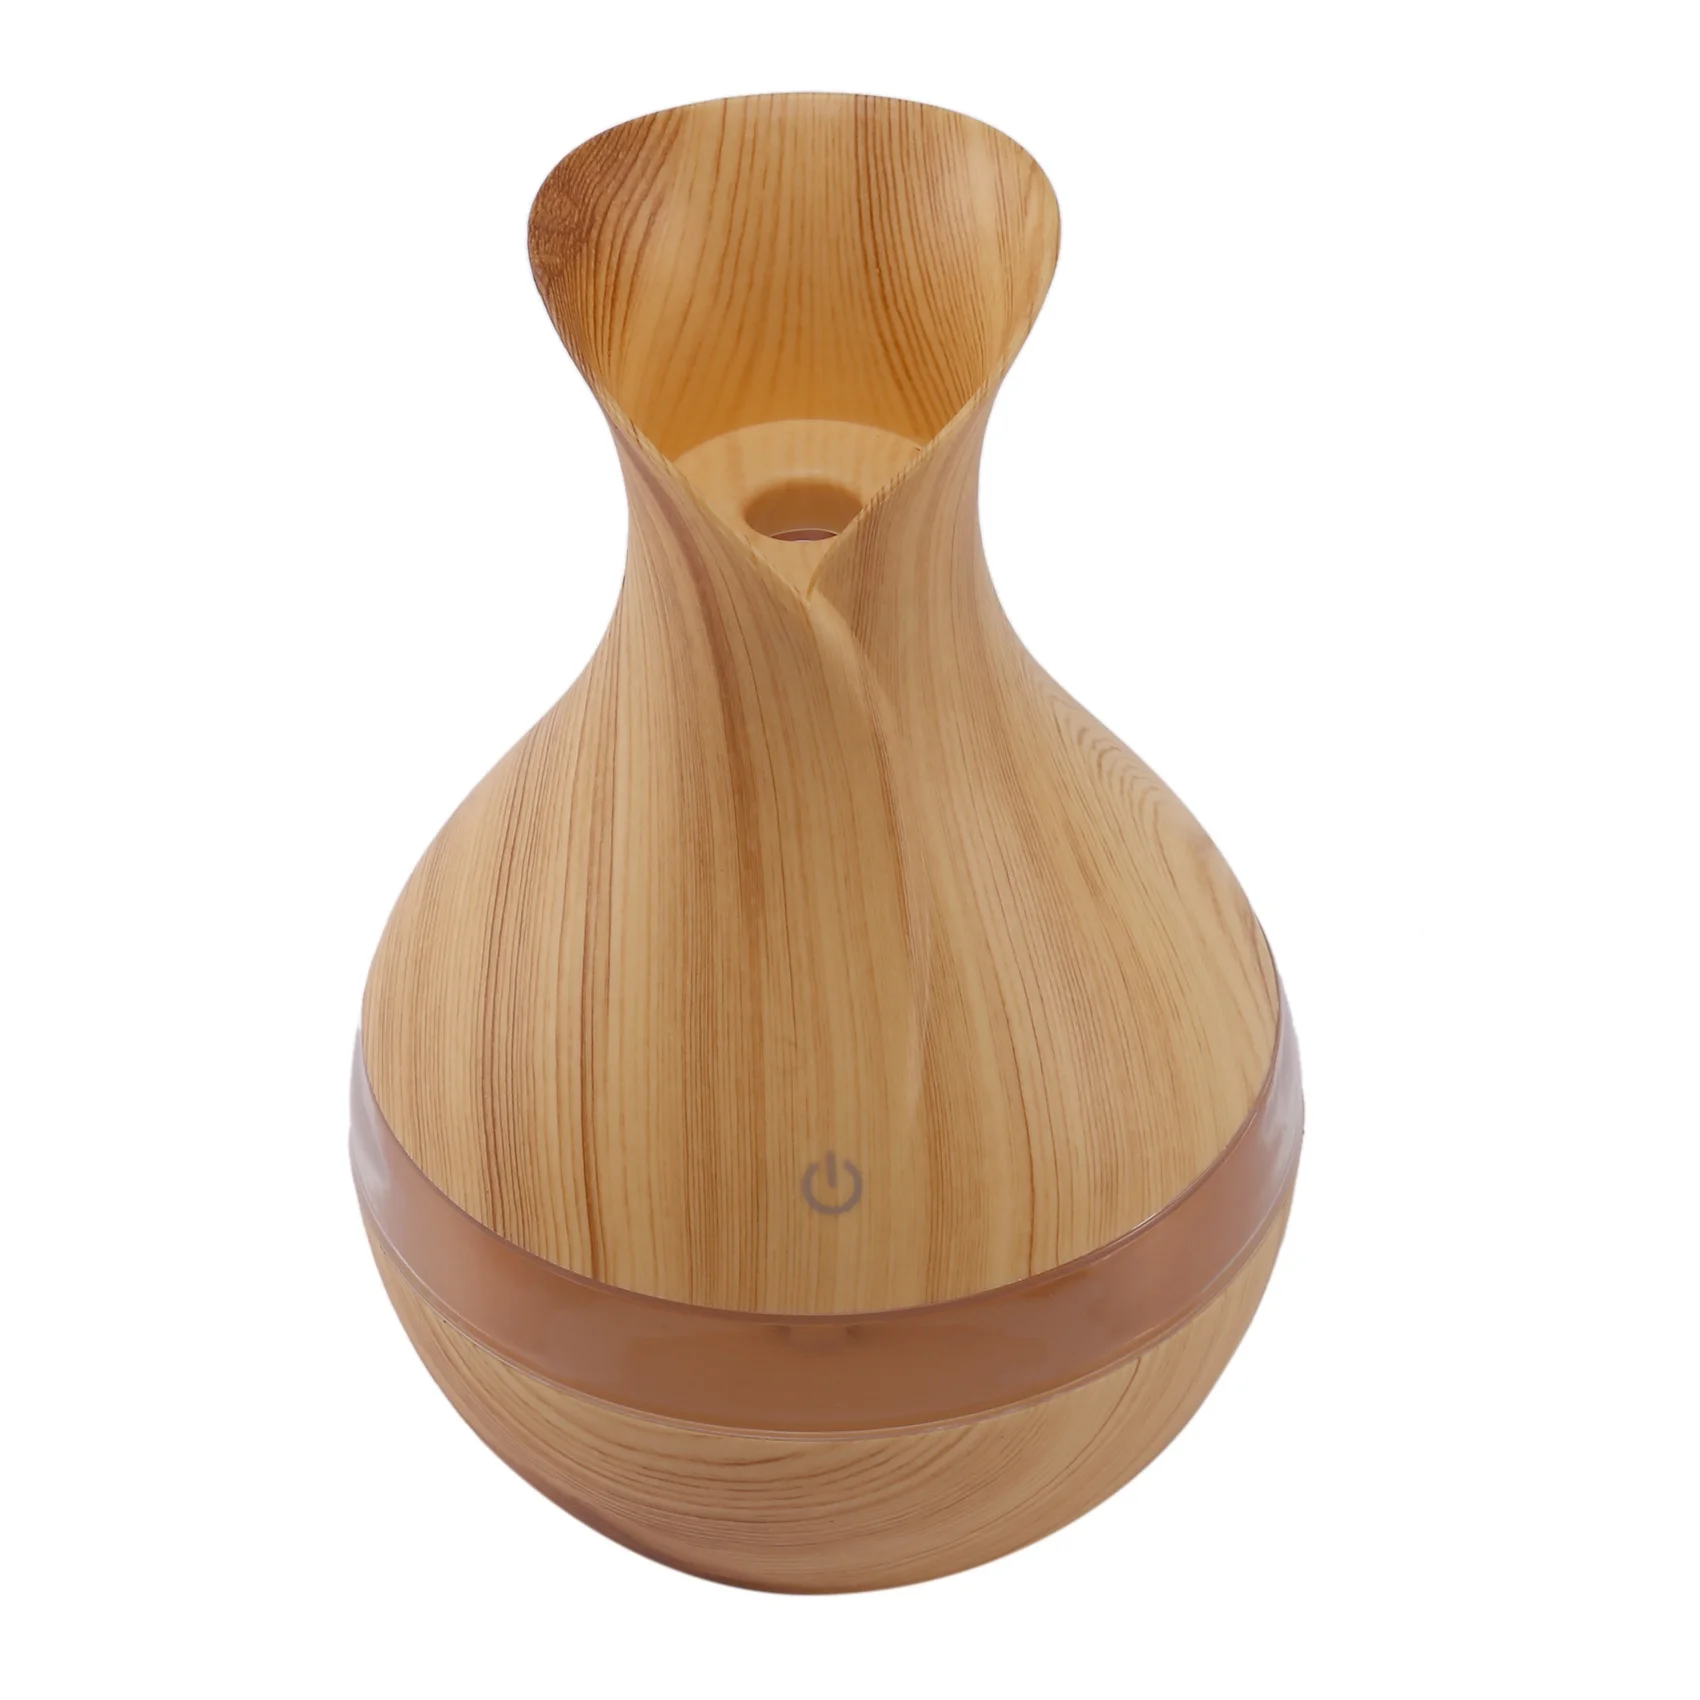 

300 Ml Ultrasonic Air Humidifier Aroma Essential Oil Diffuser With Wood Grain 7 Color Changing Led Lights For Office Home Lig